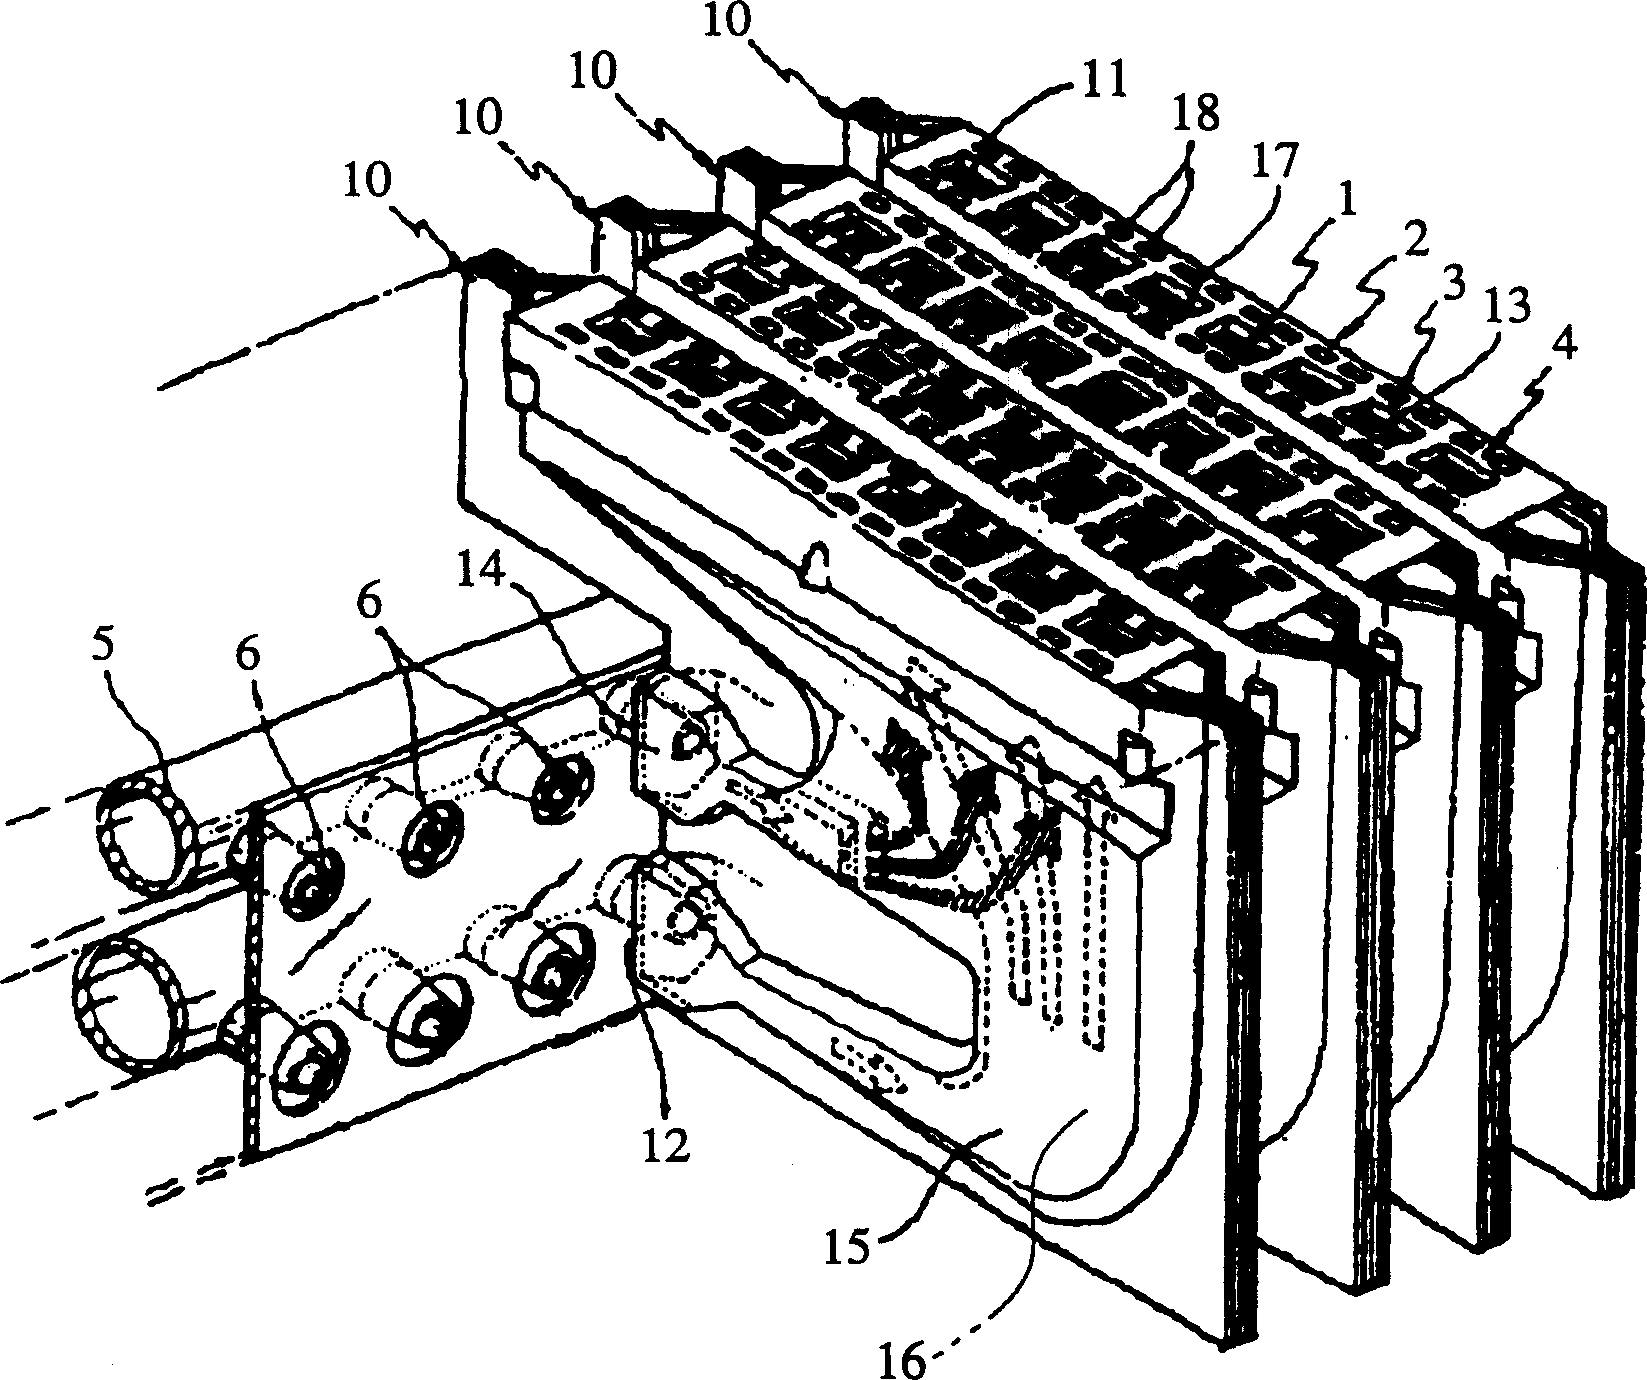 Gas burner capable of multilevel controlled